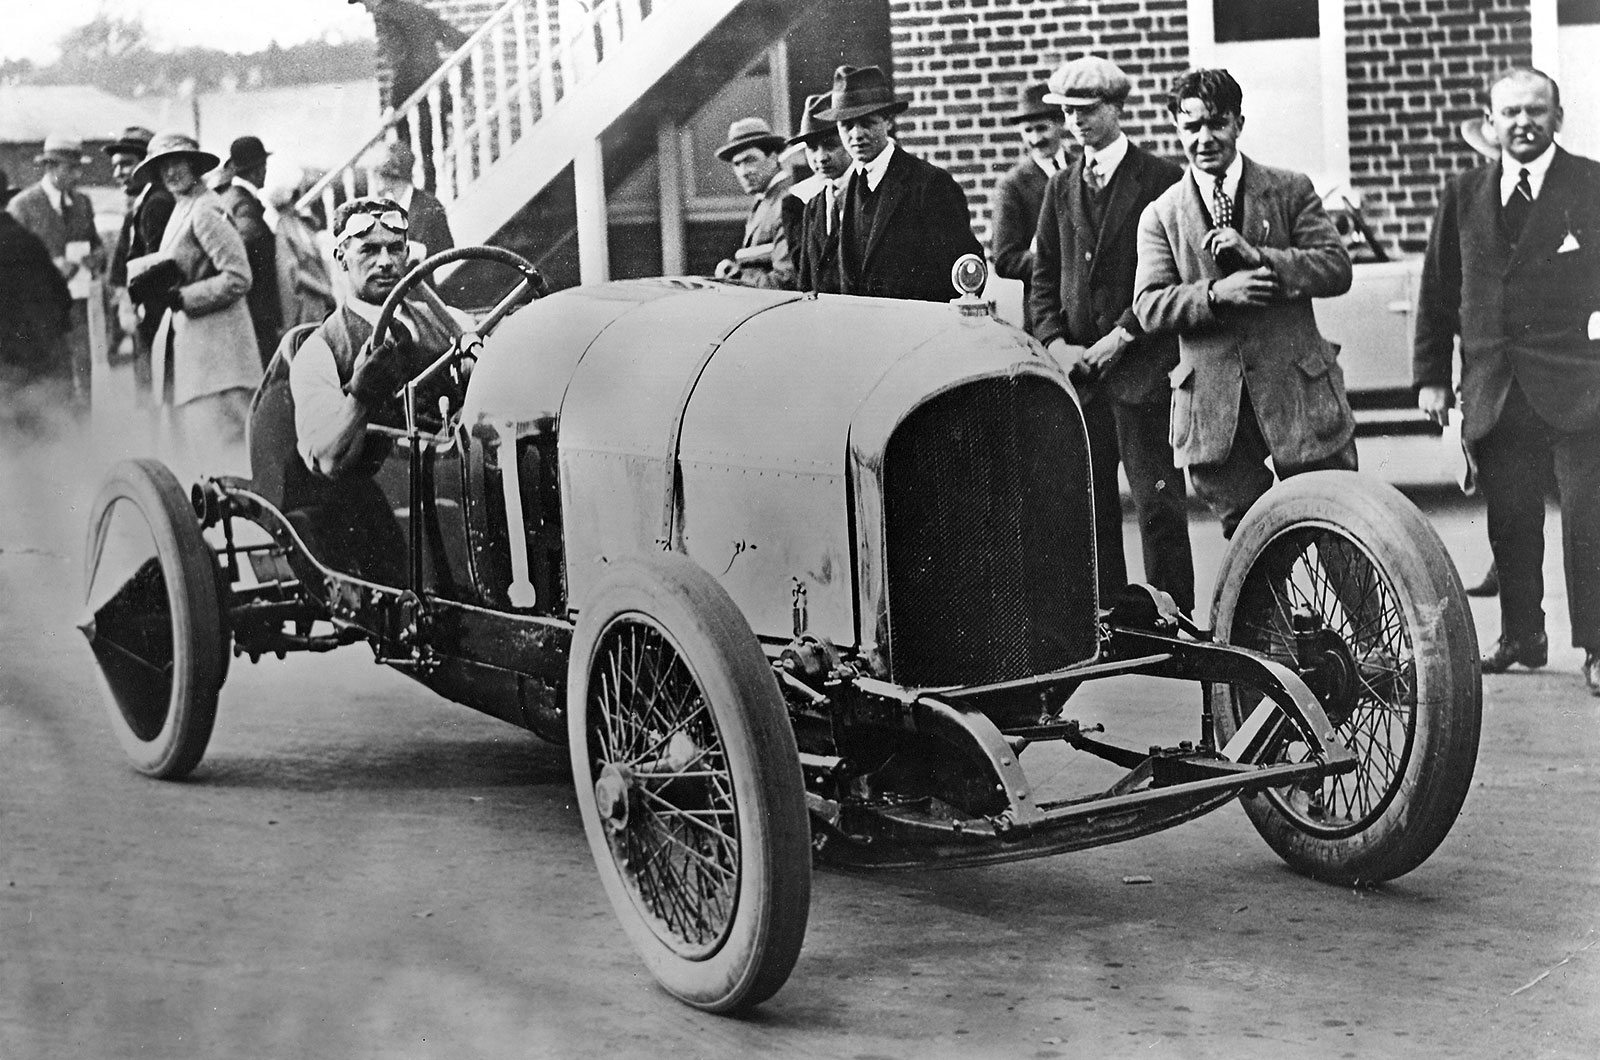 <p>Within two months of Bentley Motors being founded, the first Bentley <strong>3-Litre </strong>prototype fired into life at the Baker Street premises in London, ready for its <strong>London Motor Show debut</strong>. The following year <em>Autocar</em> road-tested the first complete car – the handbuilt prototype EXP1.</p><p>Back in 1920 we said: “For the man who wants a true sporting type of light-bodied car for use on a Continental tour, the 3-Litre Bentley is undoubtedly the car par excellence.” Two more prototypes followed: EXP2 and EXP3. The former is shown here; it's the <strong>world's oldest surviving Bentley</strong>.</p>